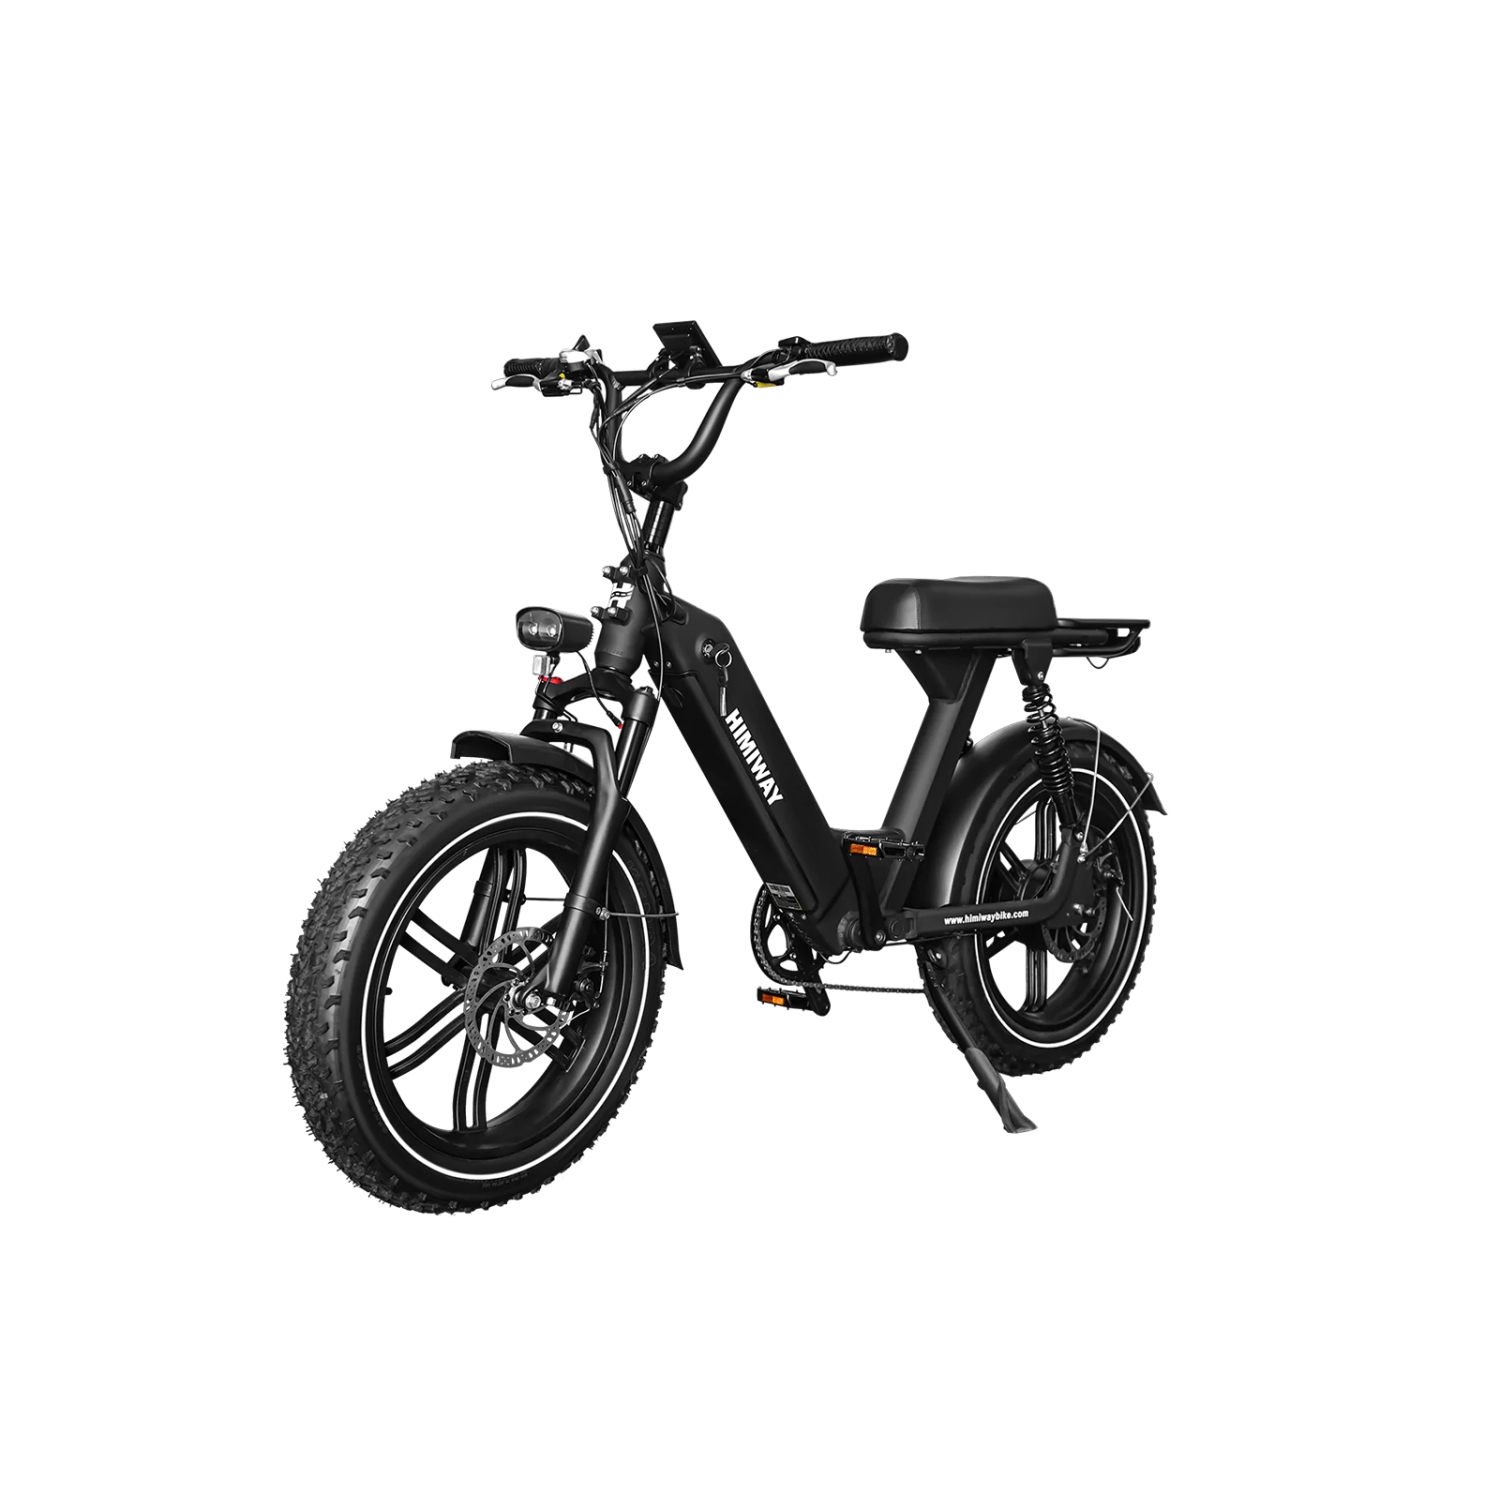 Himiway Escape Pro 750W Electric Bike - Powerful E-Moped for Adults, 30-50 Miles Battery Range, 25 MPH Speed, Full Suspension, Black